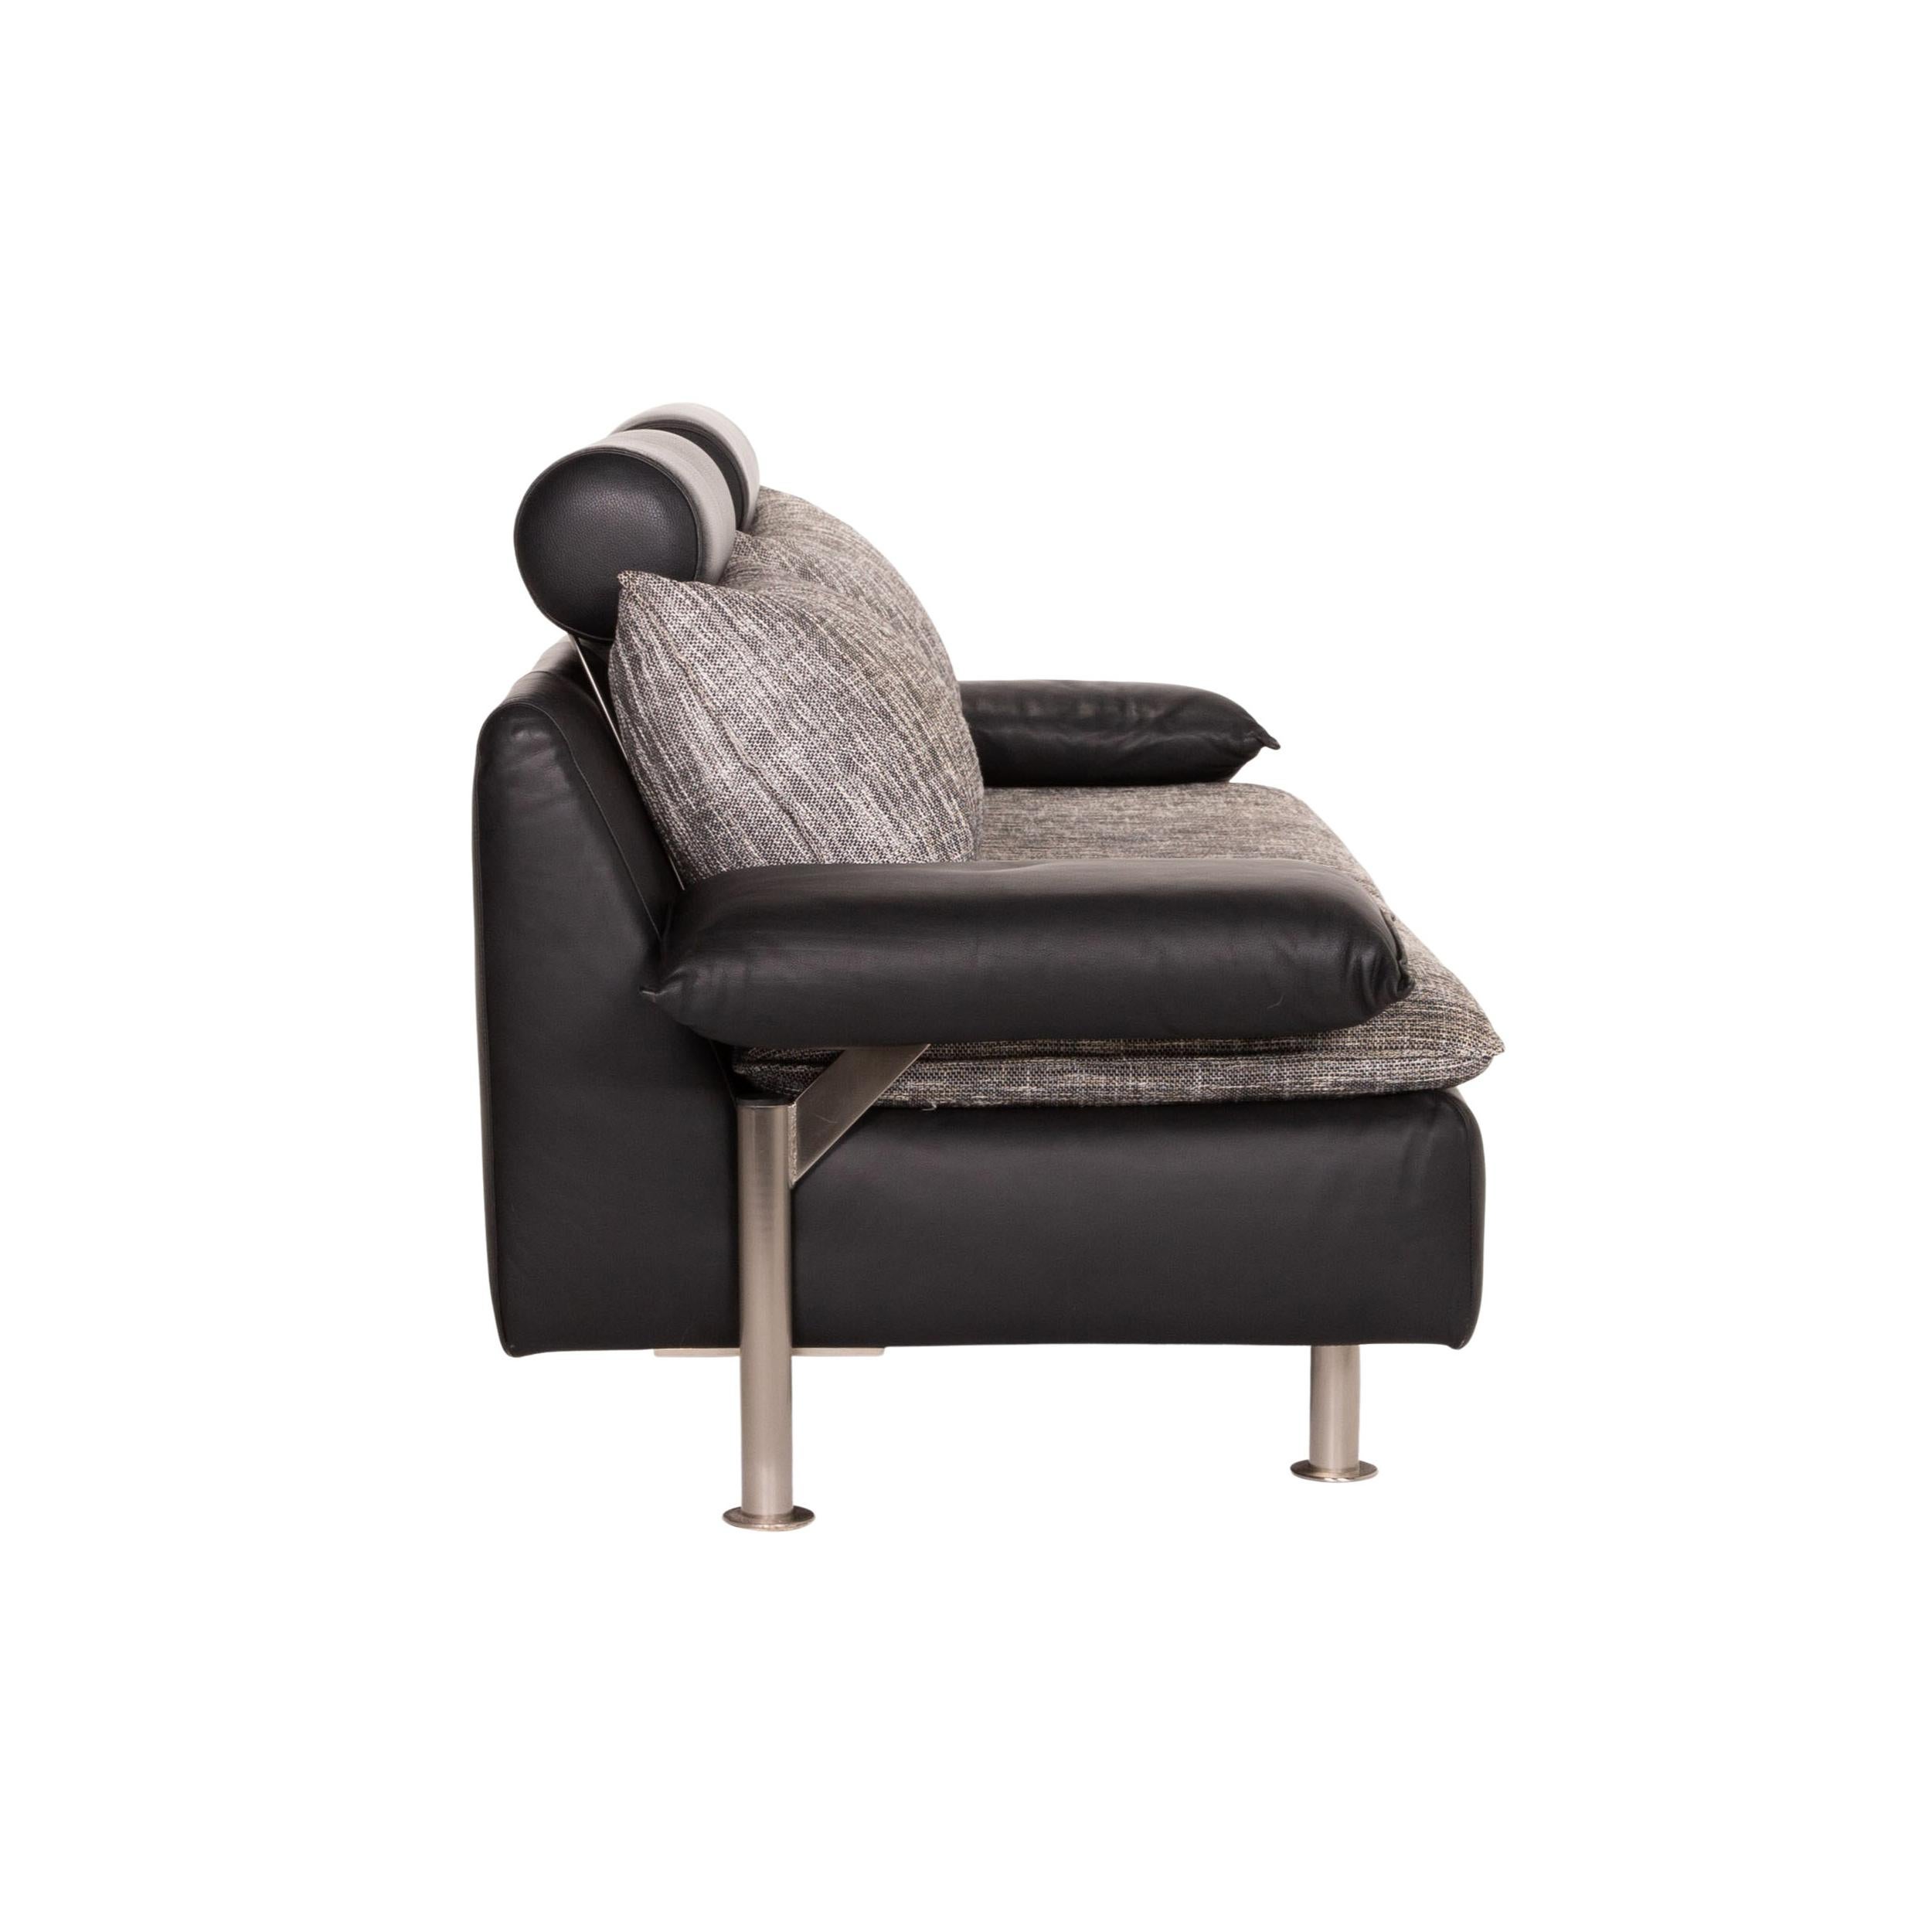 Möller Design Tayo Leather Sofa Black Two-Seat Couch 2